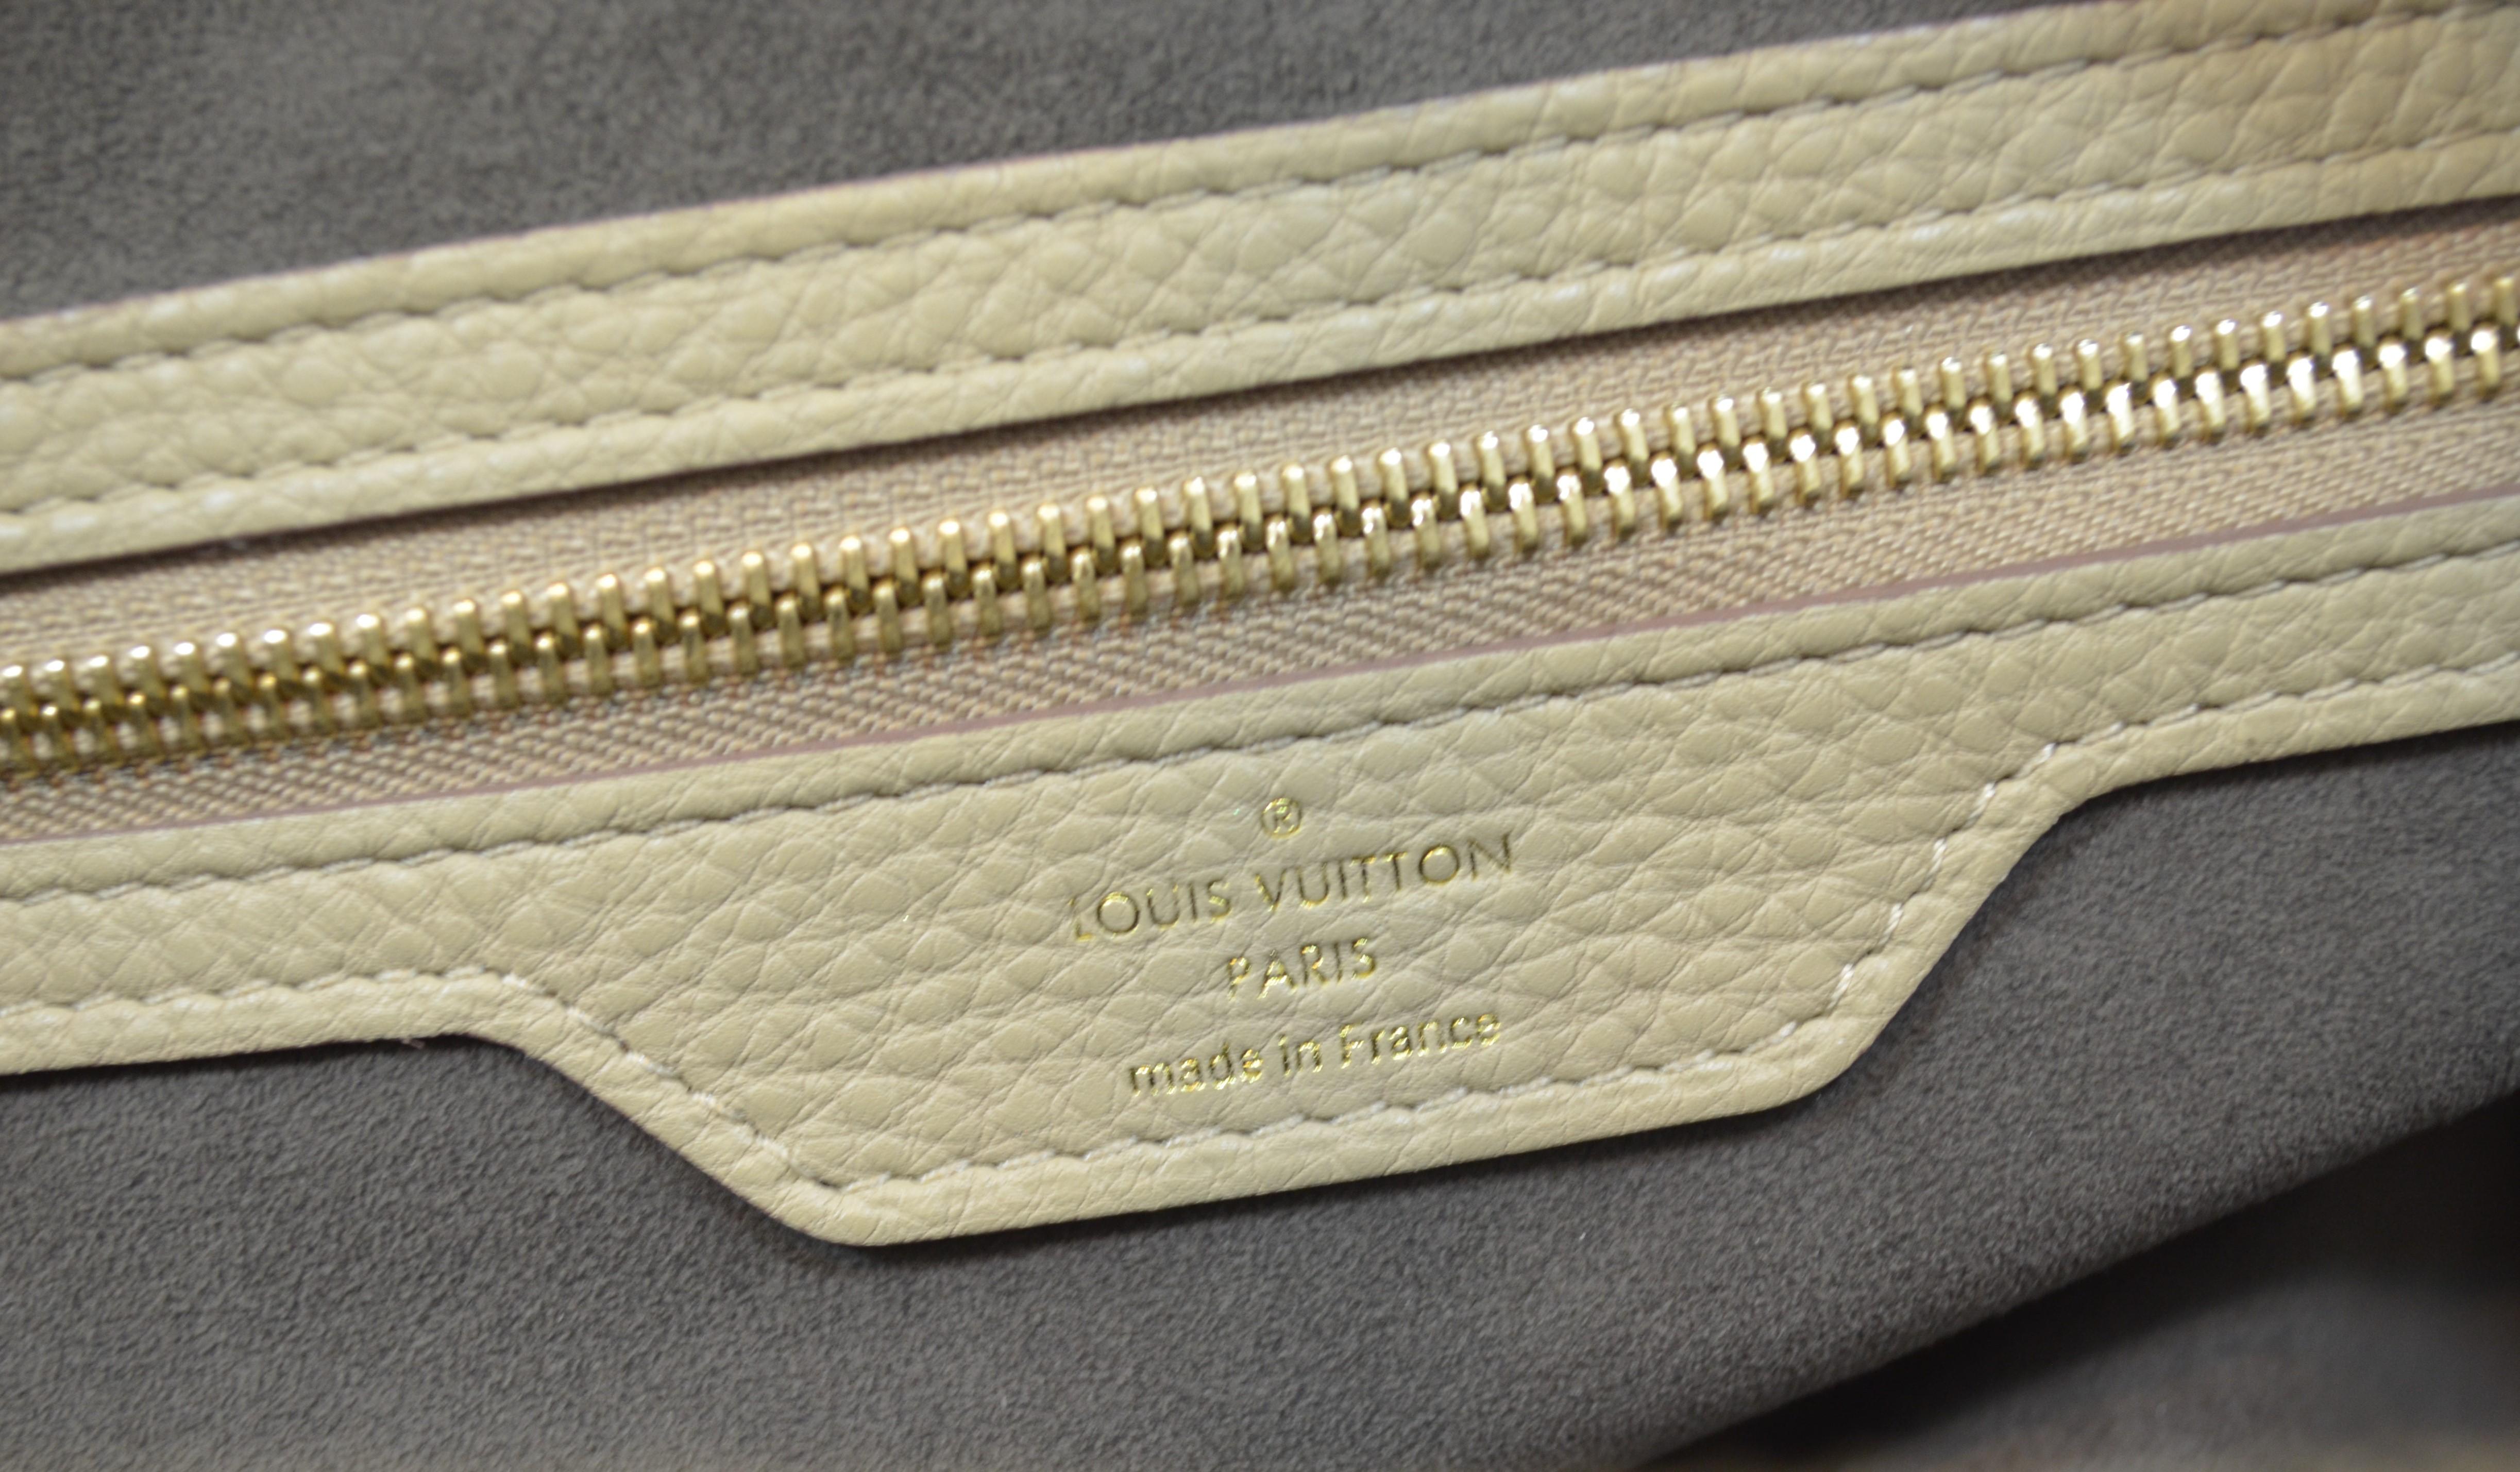 Louis Vuitton Perforated Leather Galatea MM Bag 3